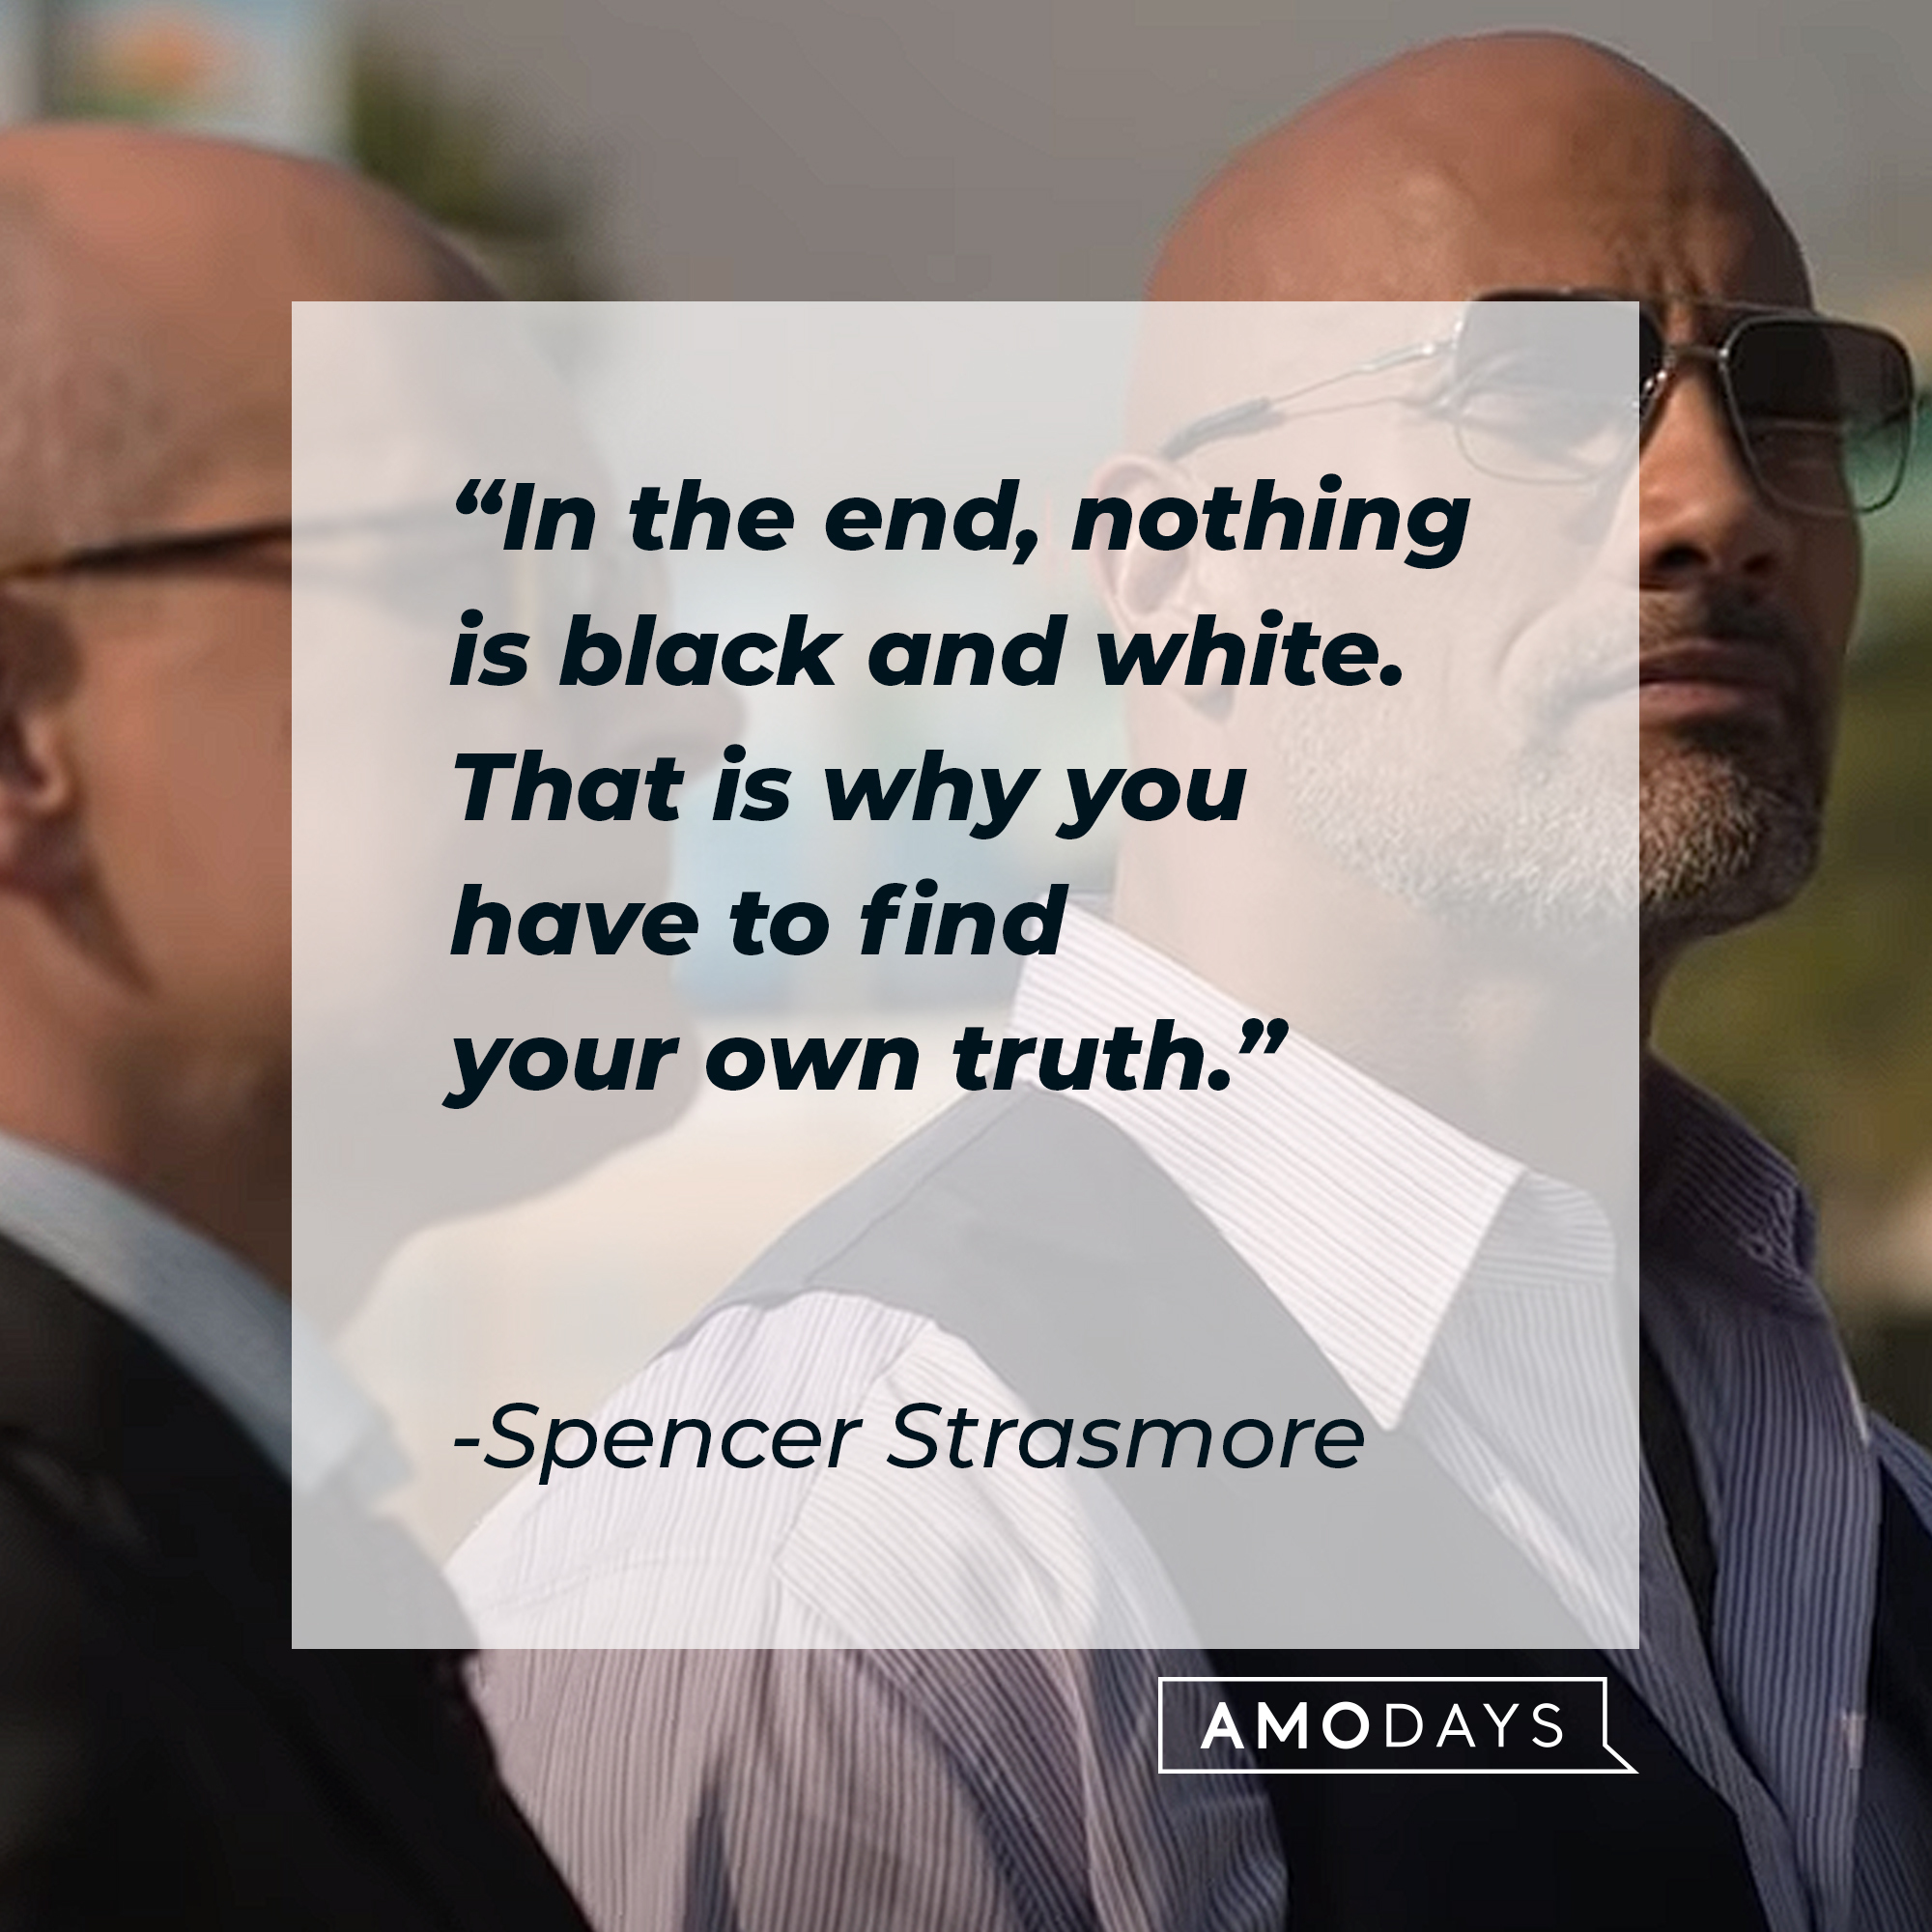 Dwayne “The Rock” Johnson as Spencer Strasmore with his quote: “In the end, nothing is black and white. That is why you have to find your own truth.”  | Source: youtube.com/HBO